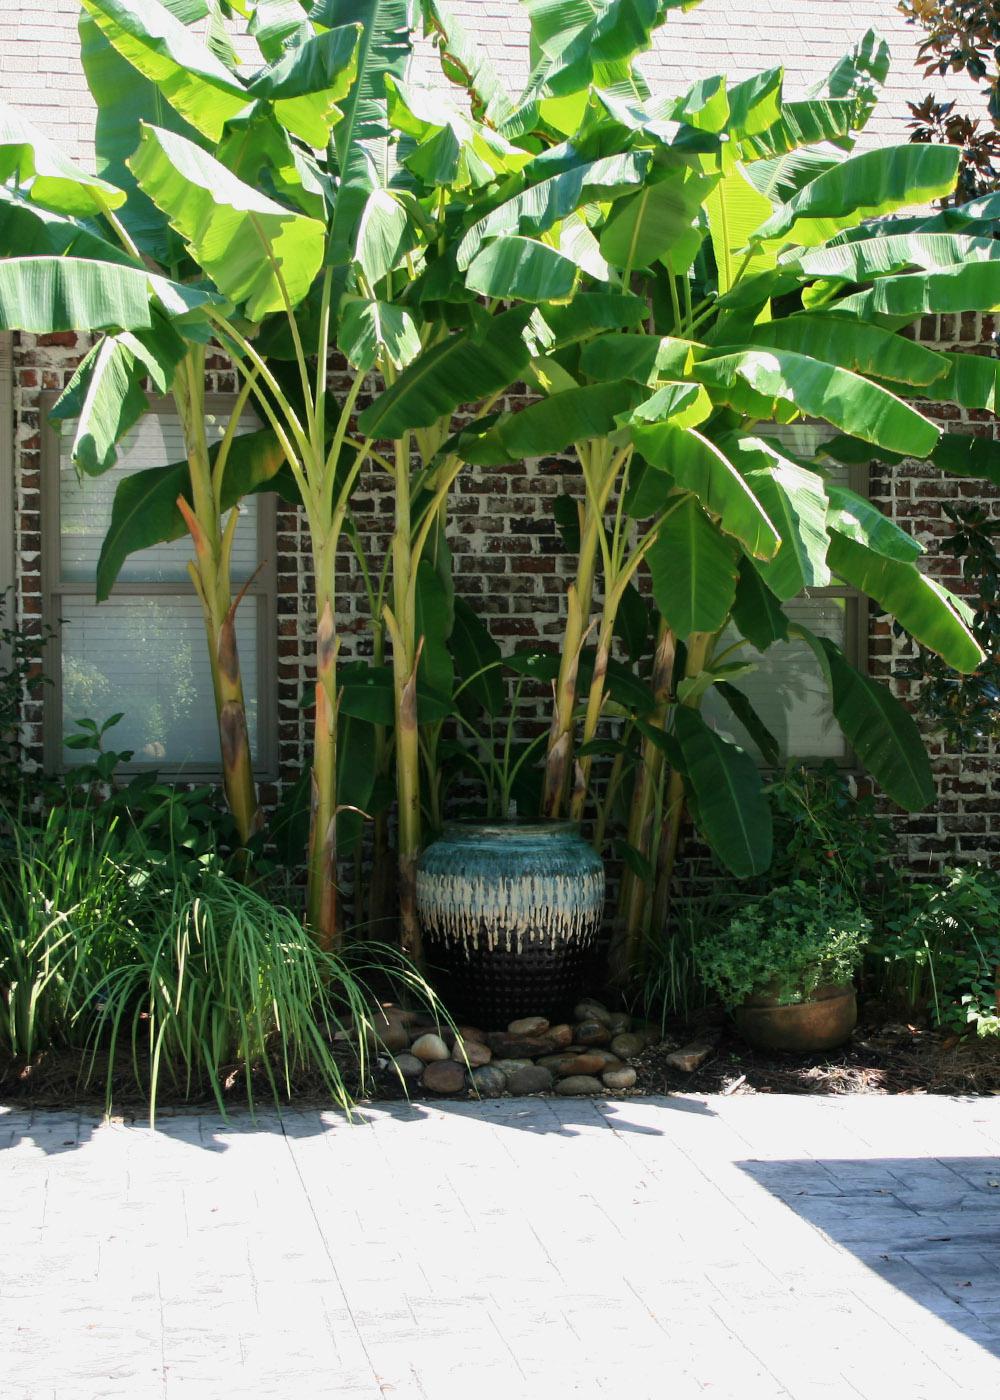 Japanese fiber bananas planted around a large urn fountain and combined with Louisiana iris add a tropical flair to this outdoor patio. (Photo by MSU Extension Service/Gary Bachman)